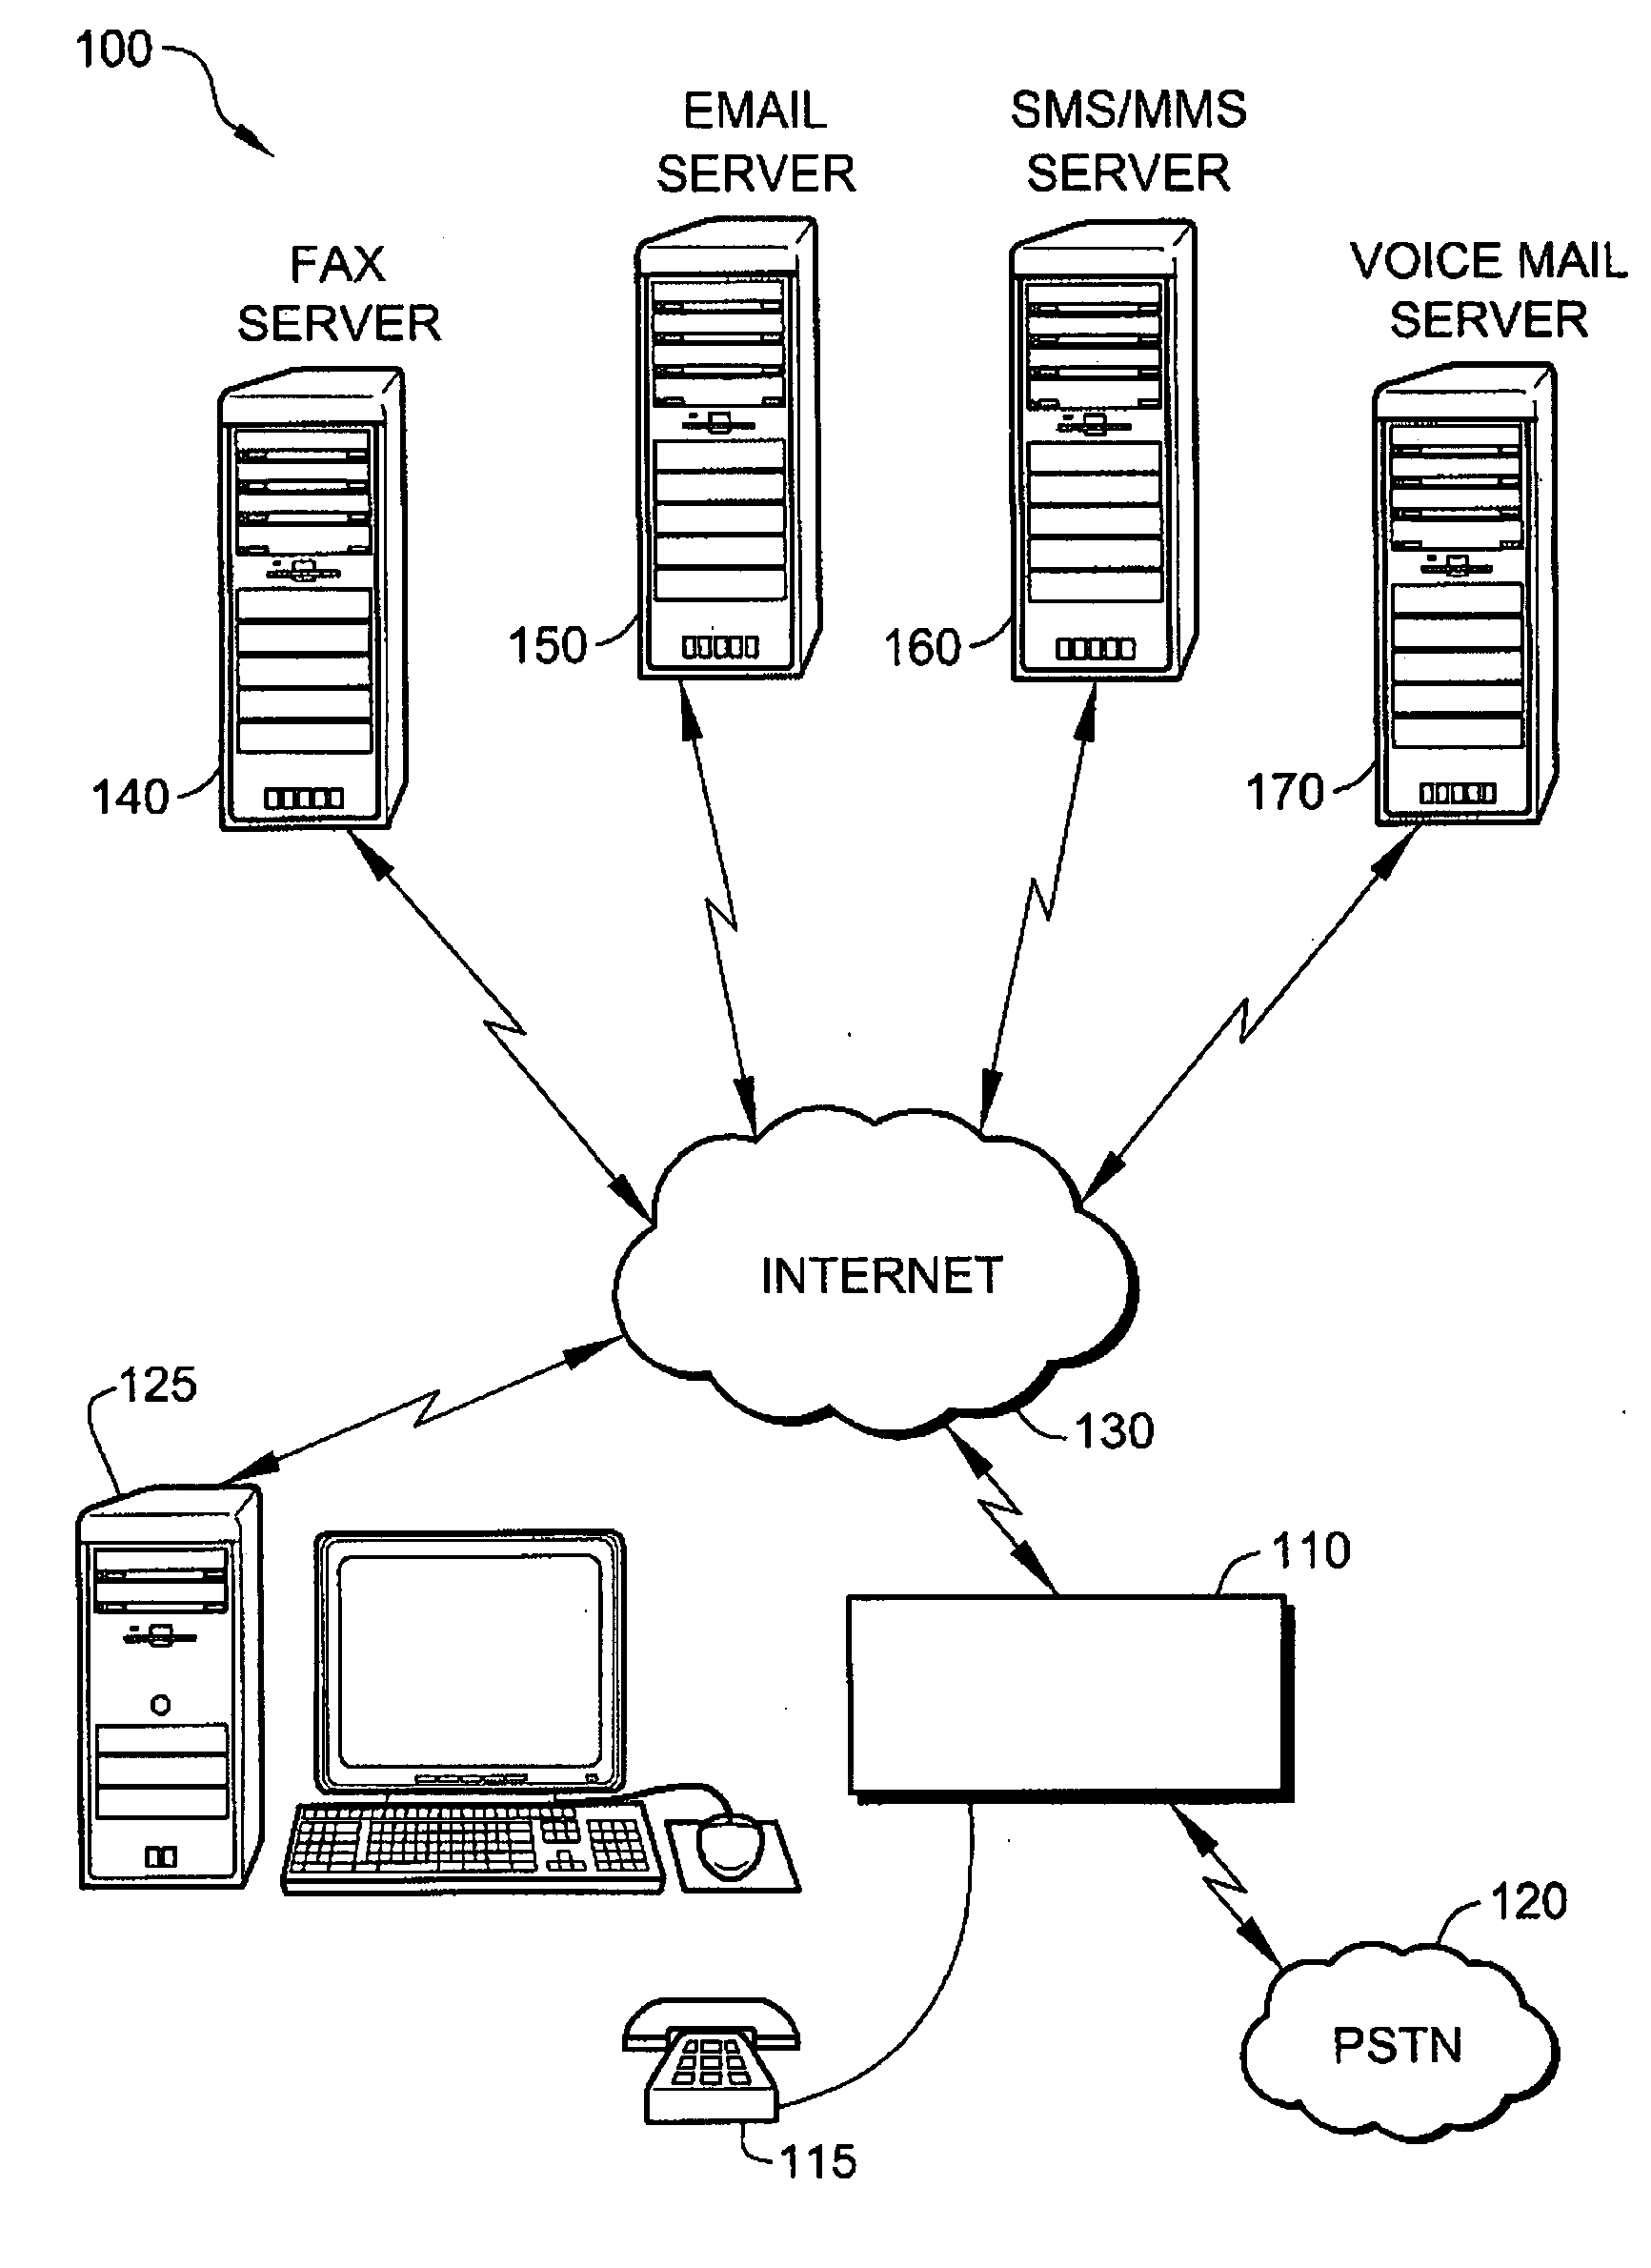 System and method to enhance telephone call awareness